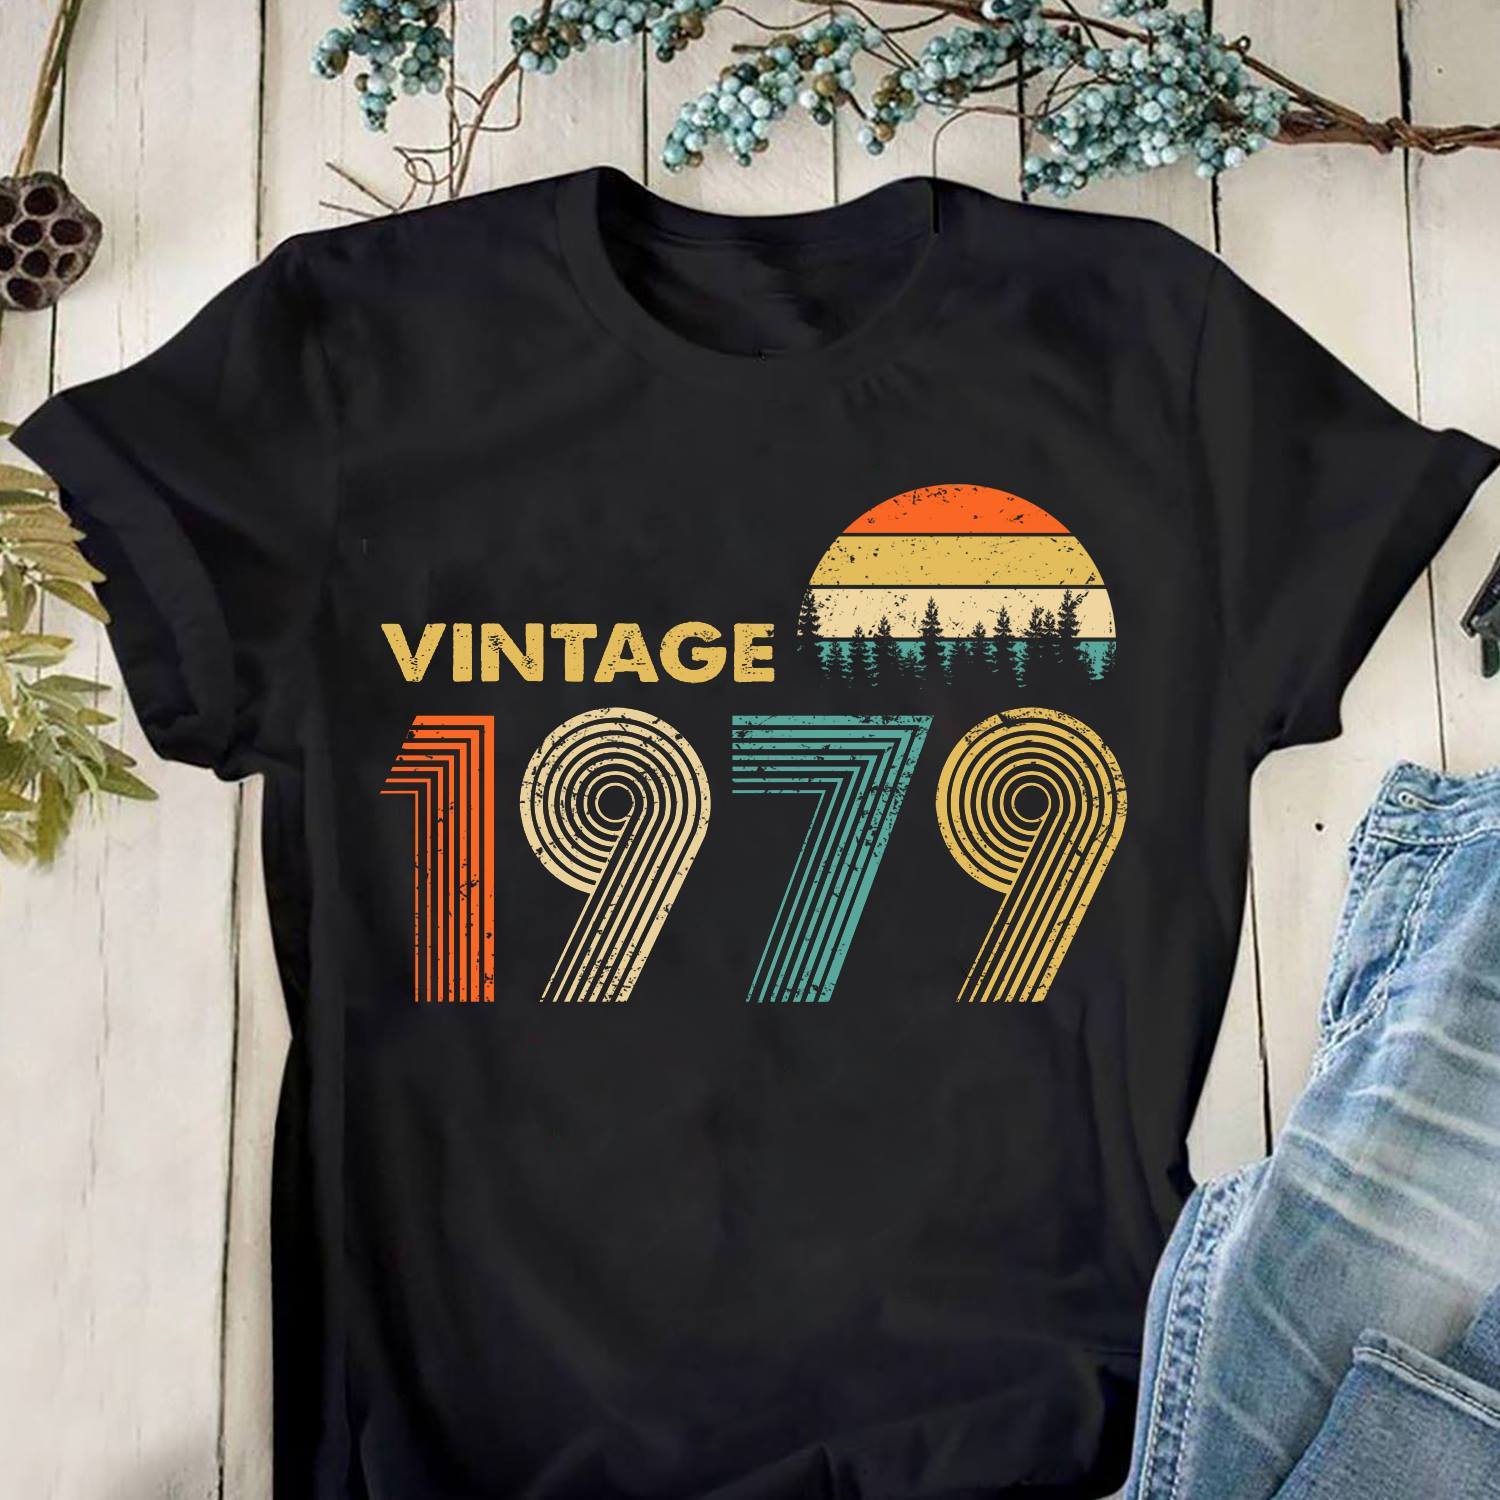 Vintage 1979, Birthday Gifts Idea, Gift For Her For Him Unisex T-Shirt KM0704